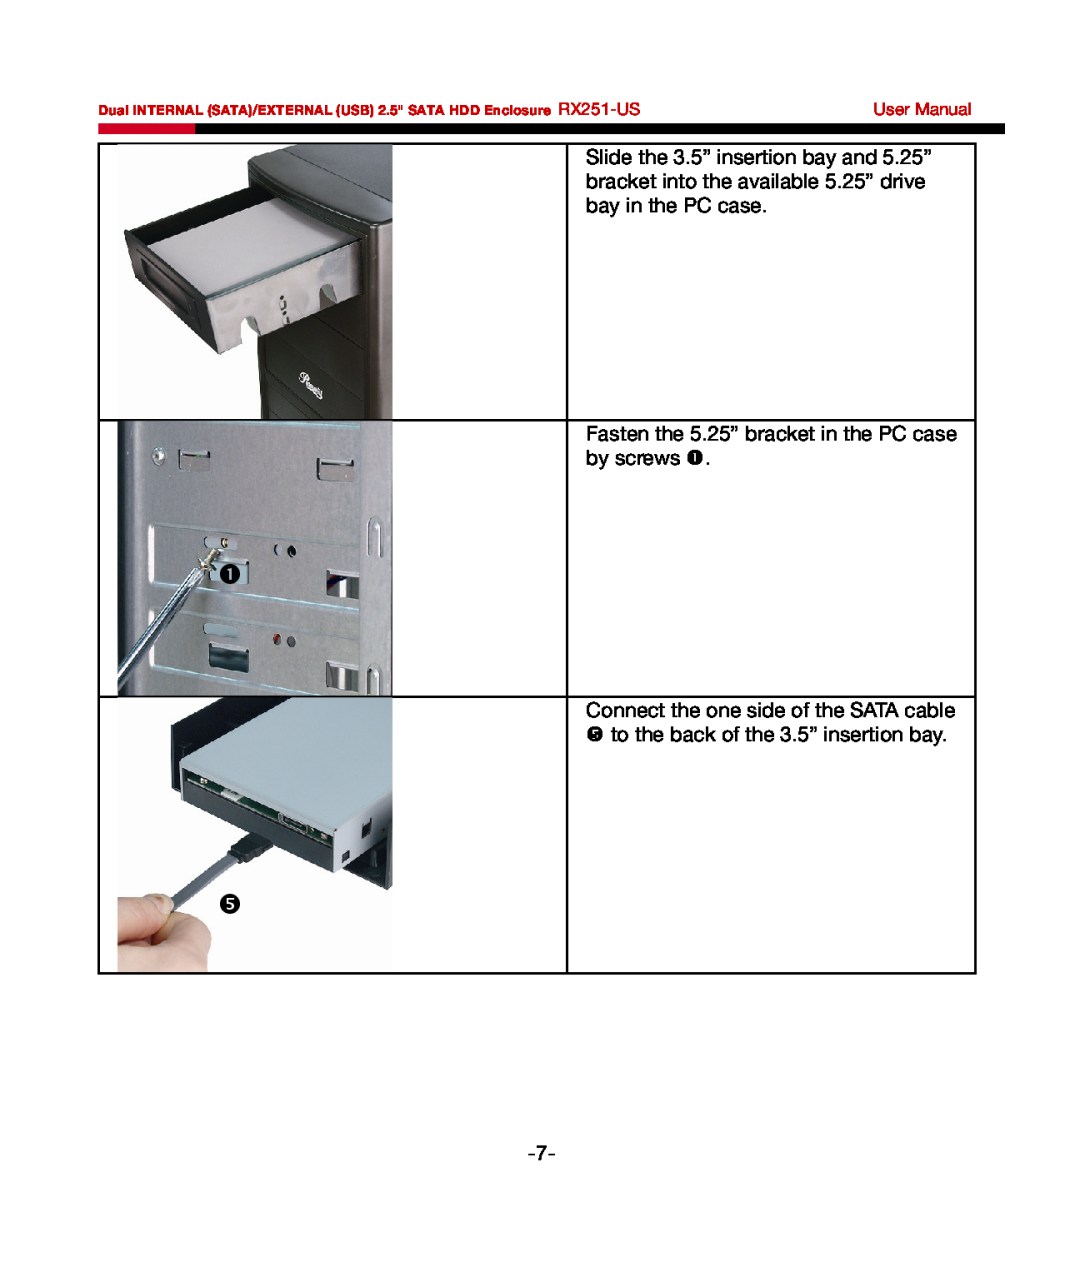 Rosewill RX251-US user manual 